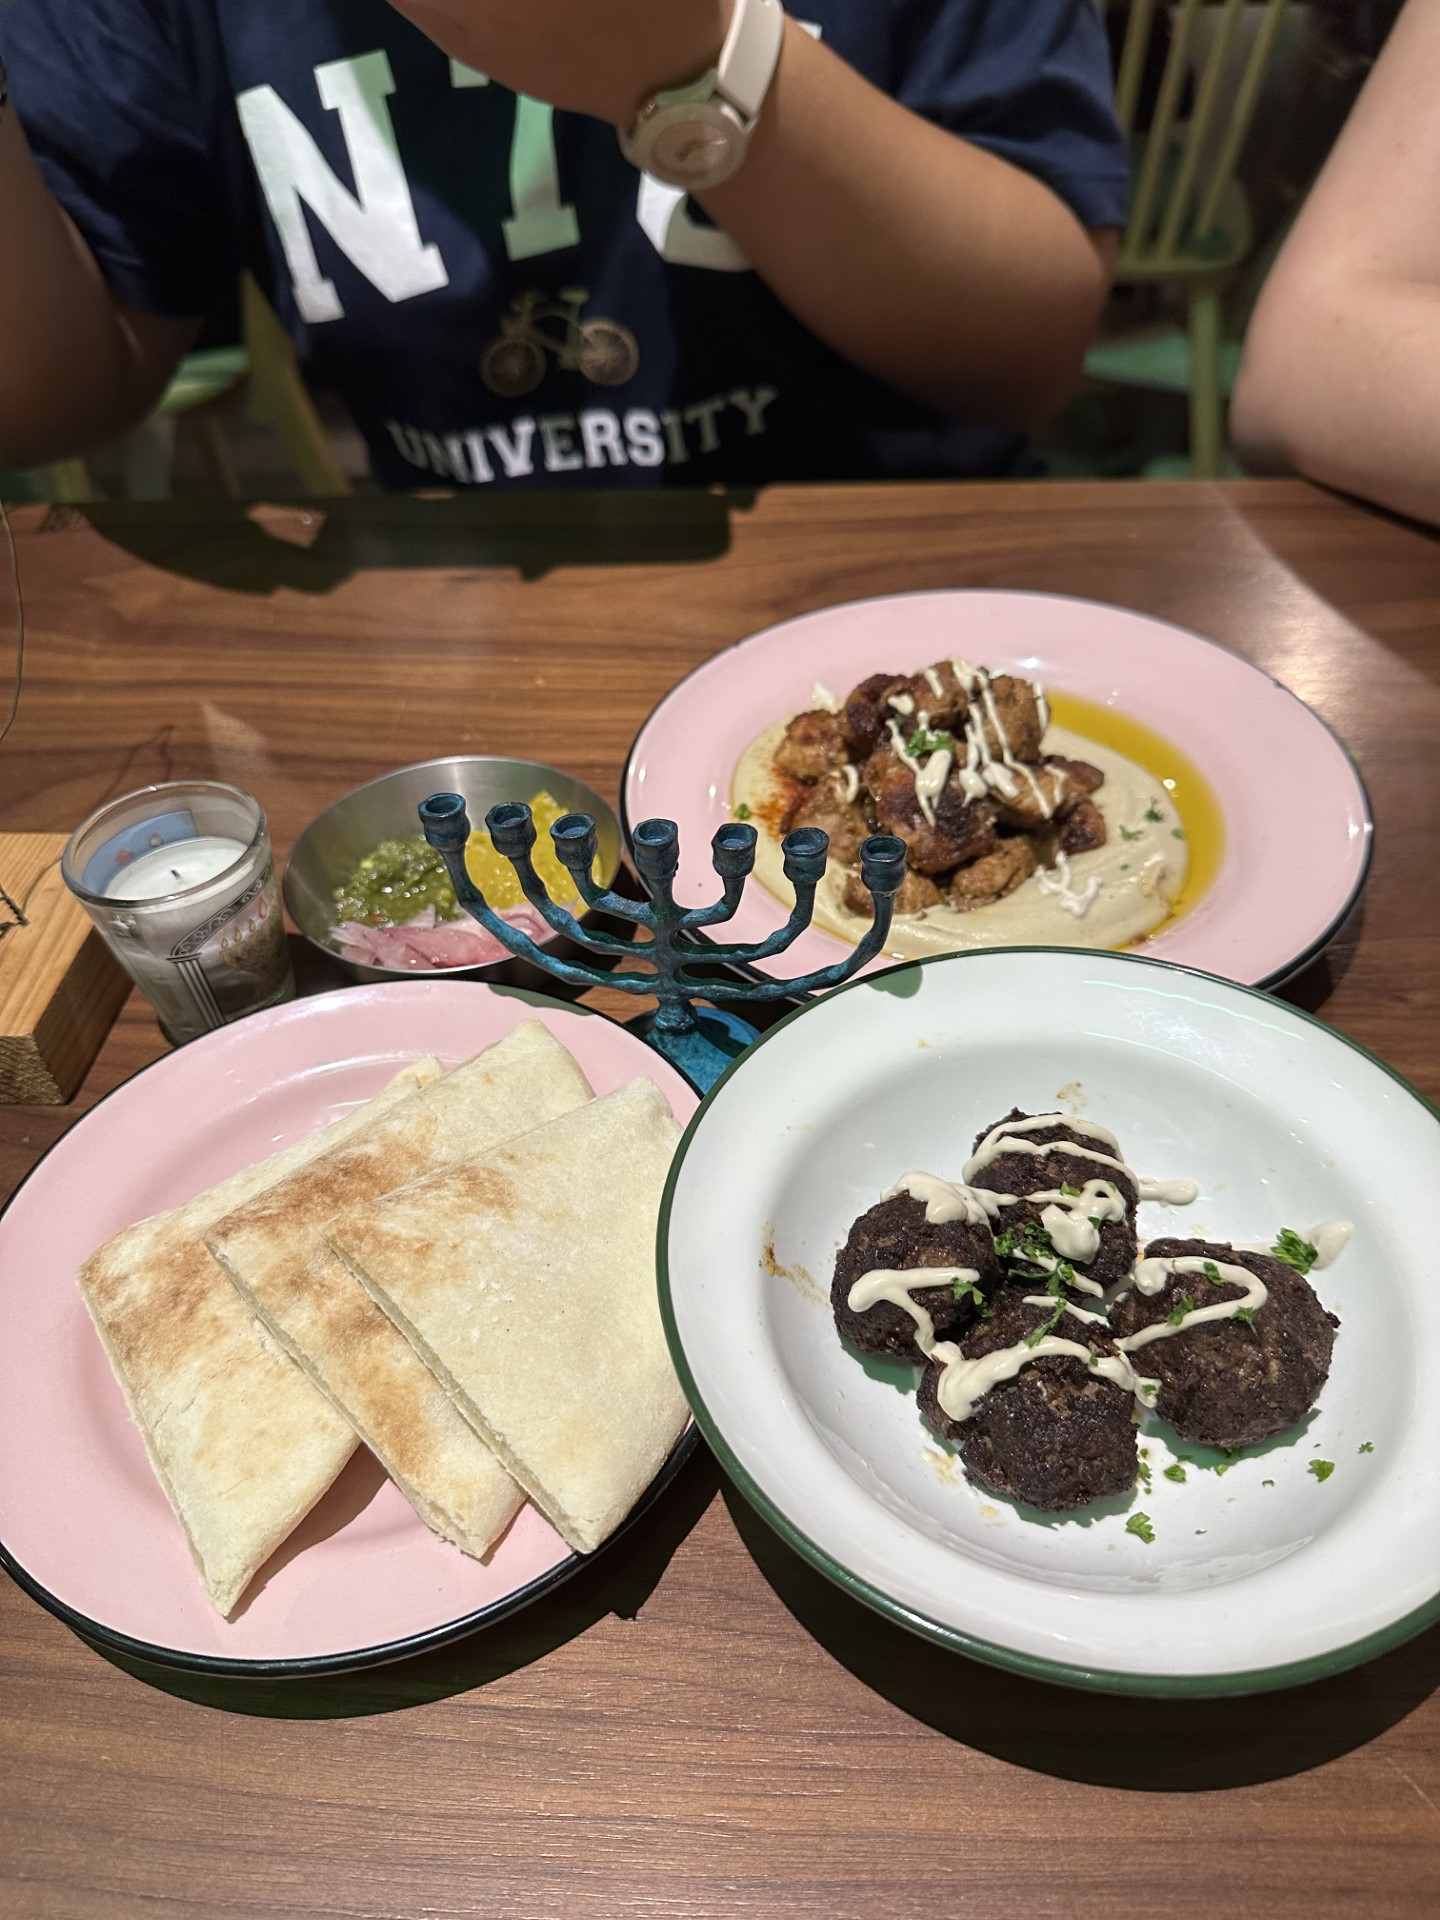 Being Jewish American Abroad – How Palestine Israel has come up in my everyday conversations in Taiwan